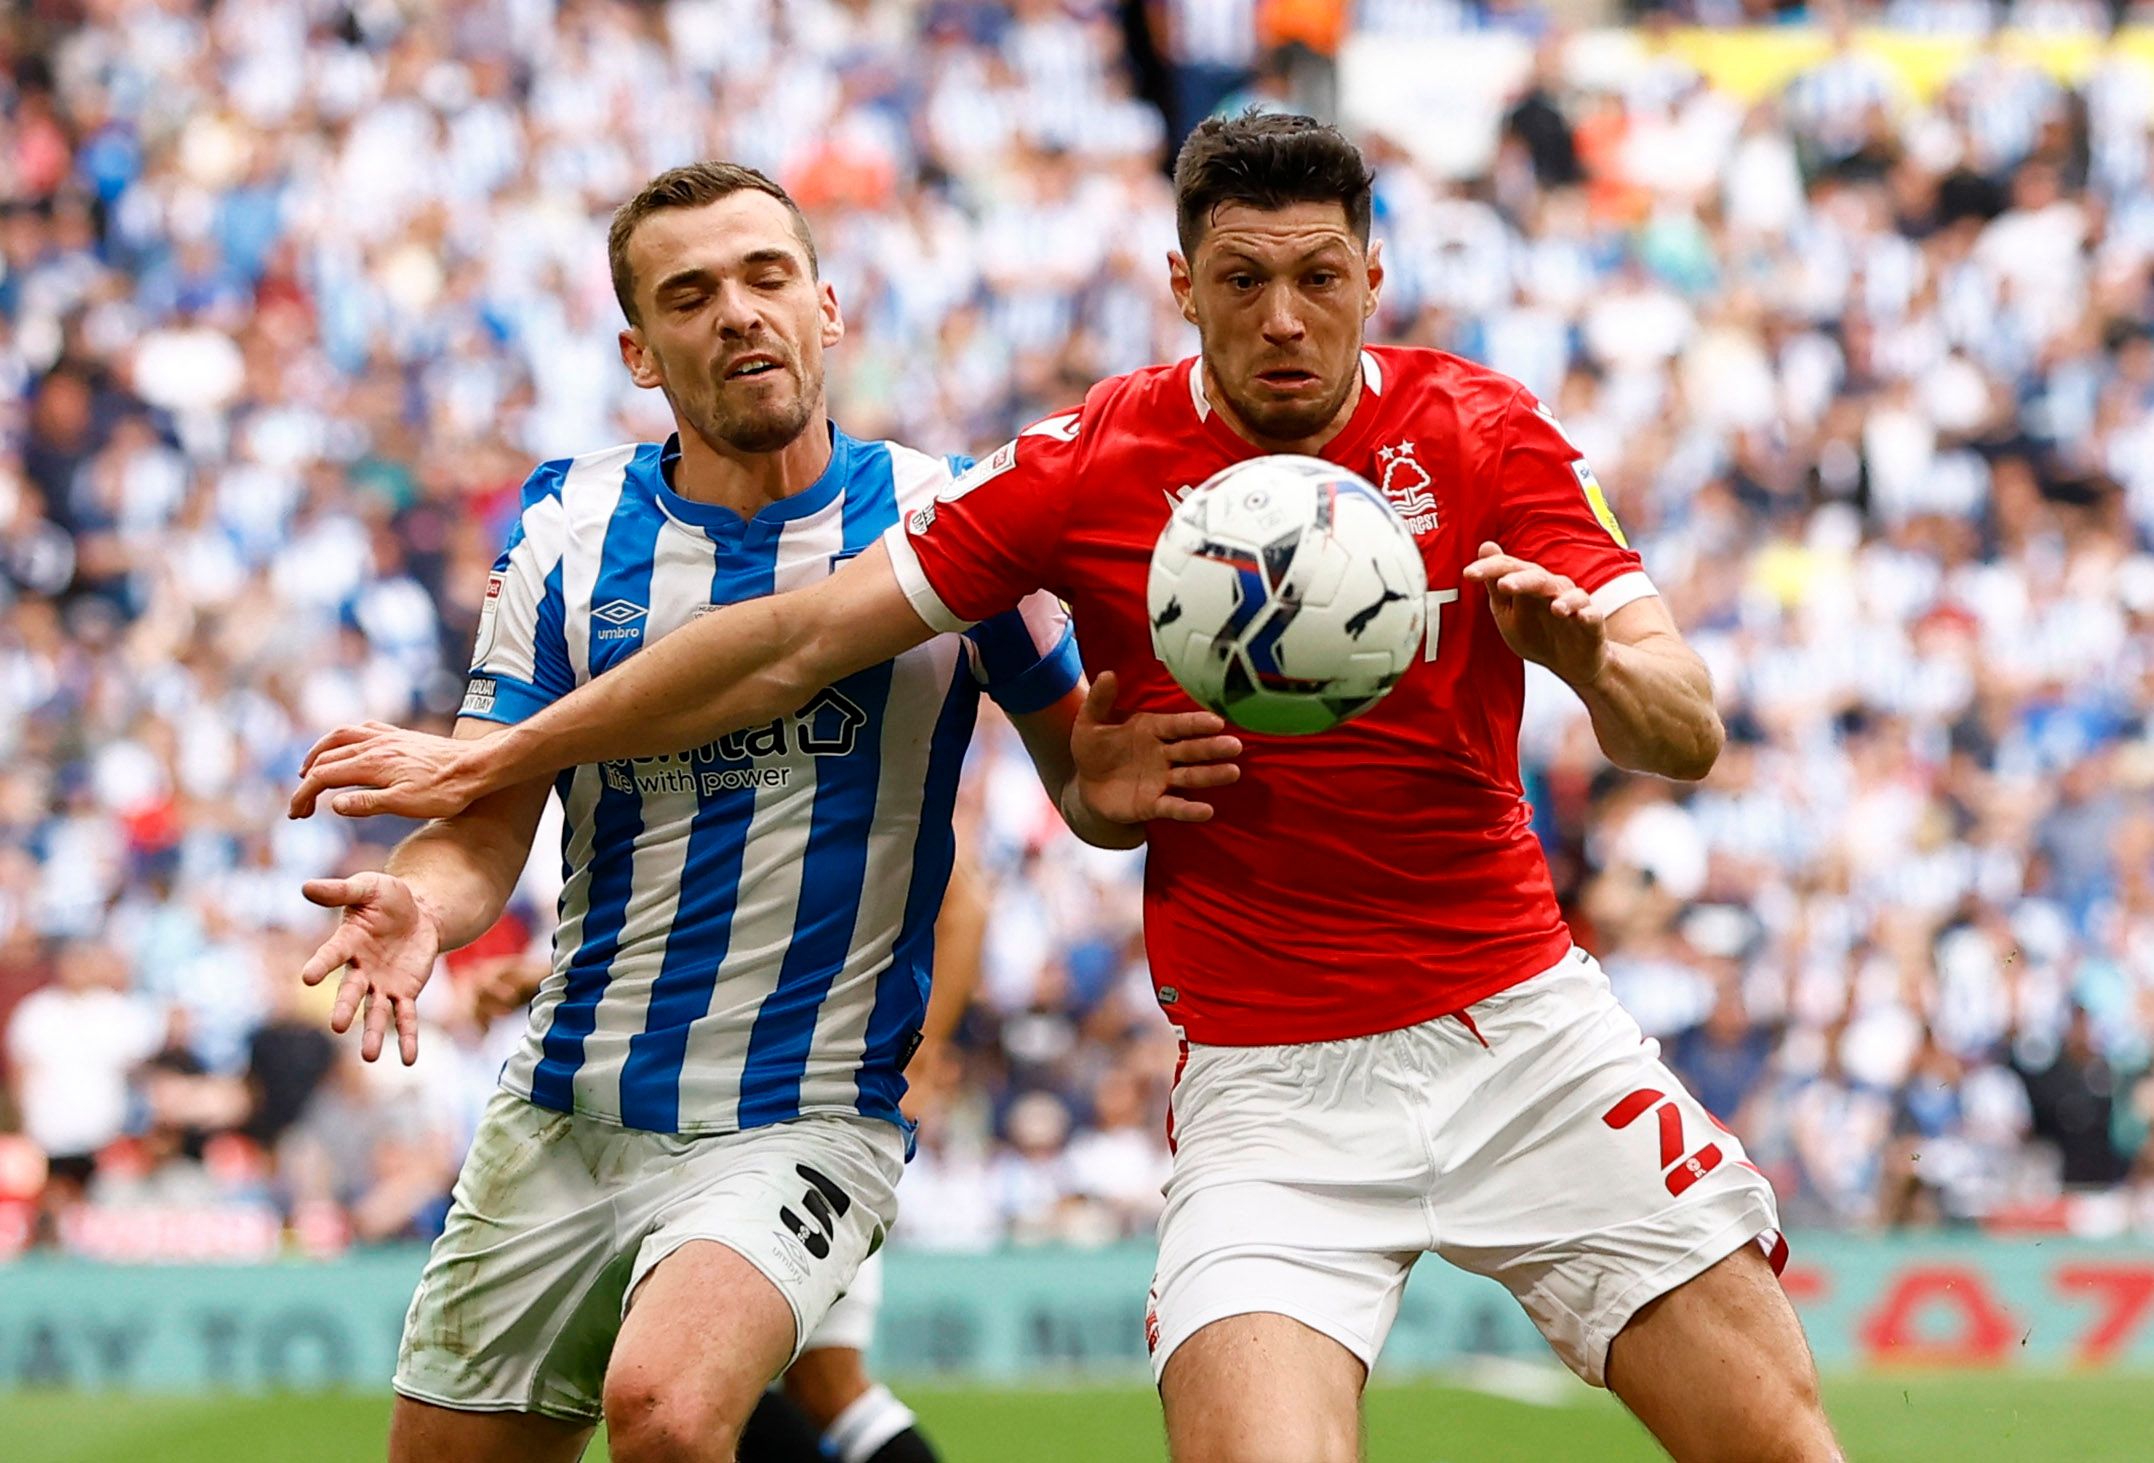 Soccer Football - Championship Play-Off Final - Huddersfield Town v Nottingham Forest - Wembley Stadium, London, Britain - May 29, 2022 Huddersfield Town's Harry Toffolo in action with Nottingham Forest's Scott McKenna Action Images via Reuters/Andrew Boyers